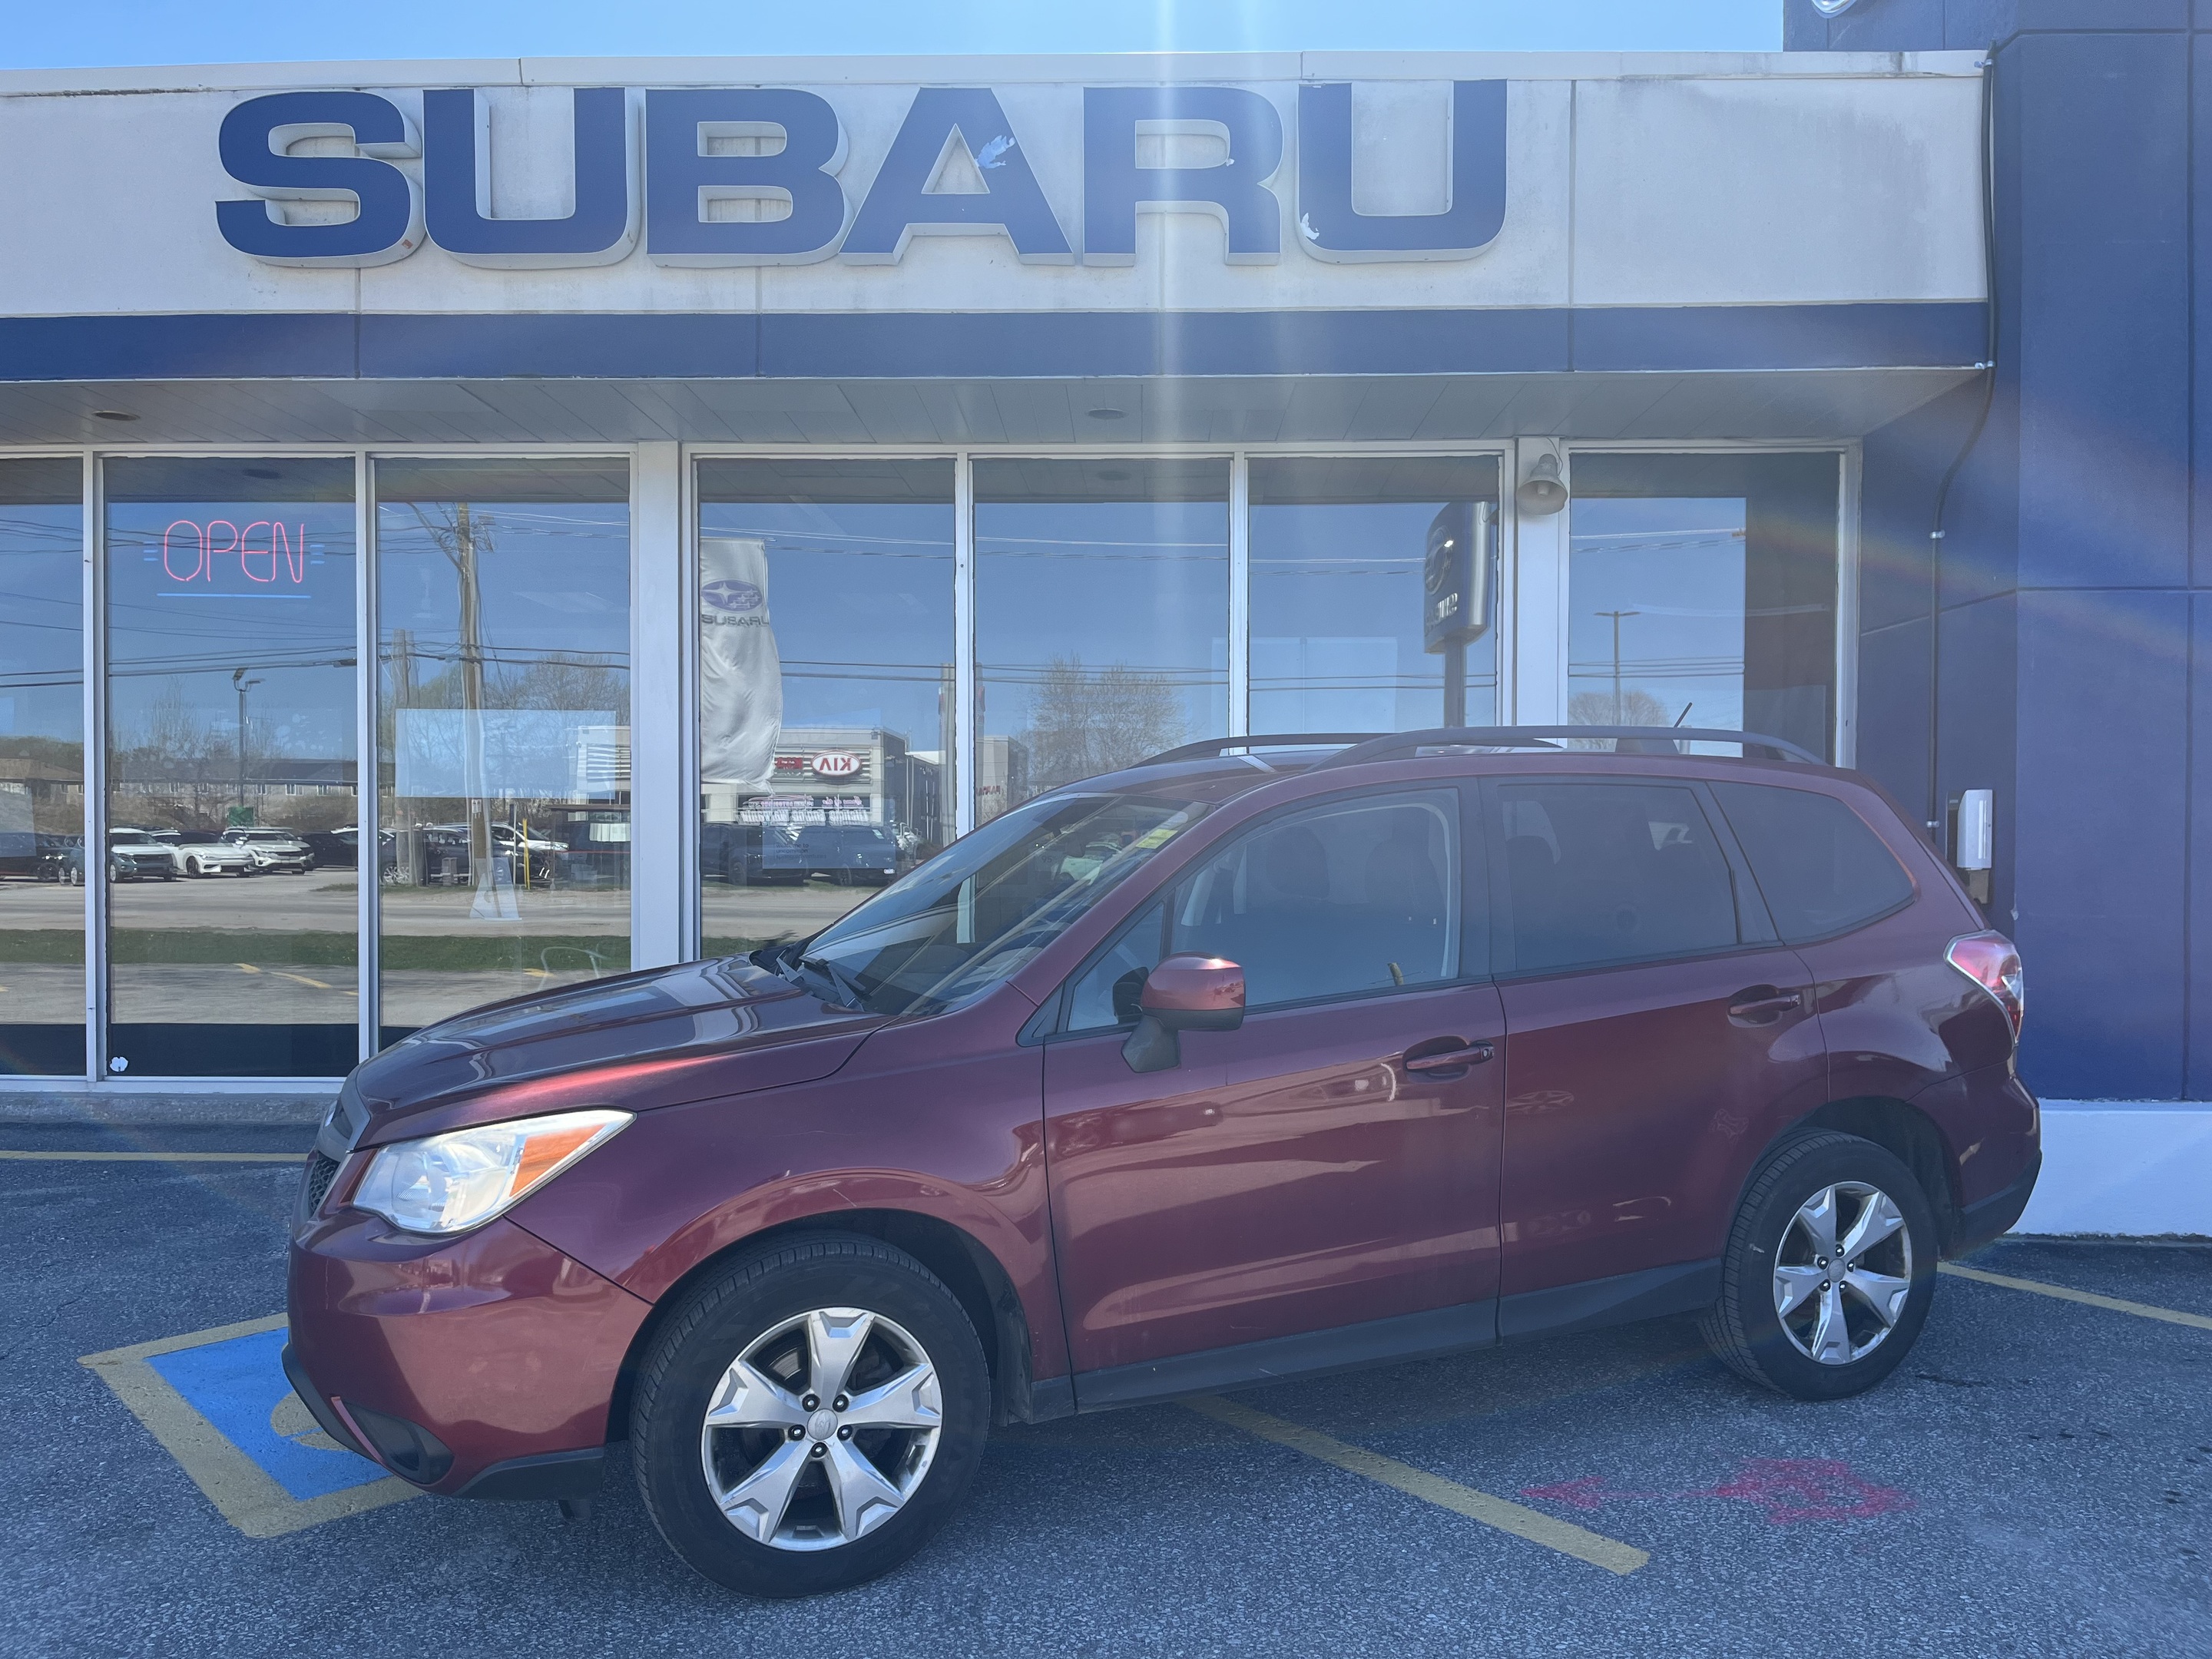 2015 Subaru Forester 2.5i Convenience Package (CVT) 4dr All-Wheel Drive